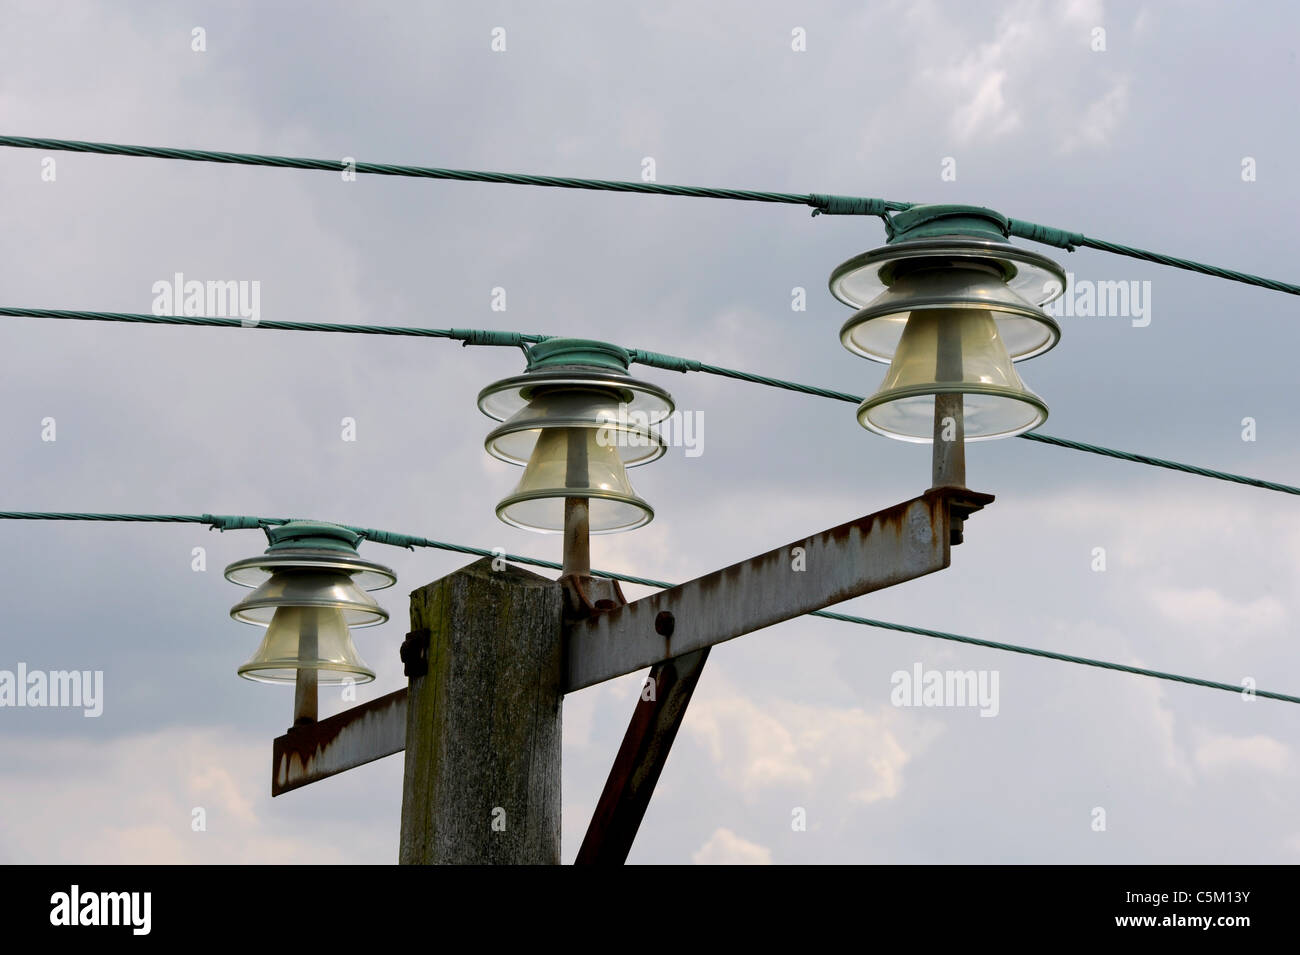 Overhead power lines with glass insulators, East Sussex, UK Stock Photo